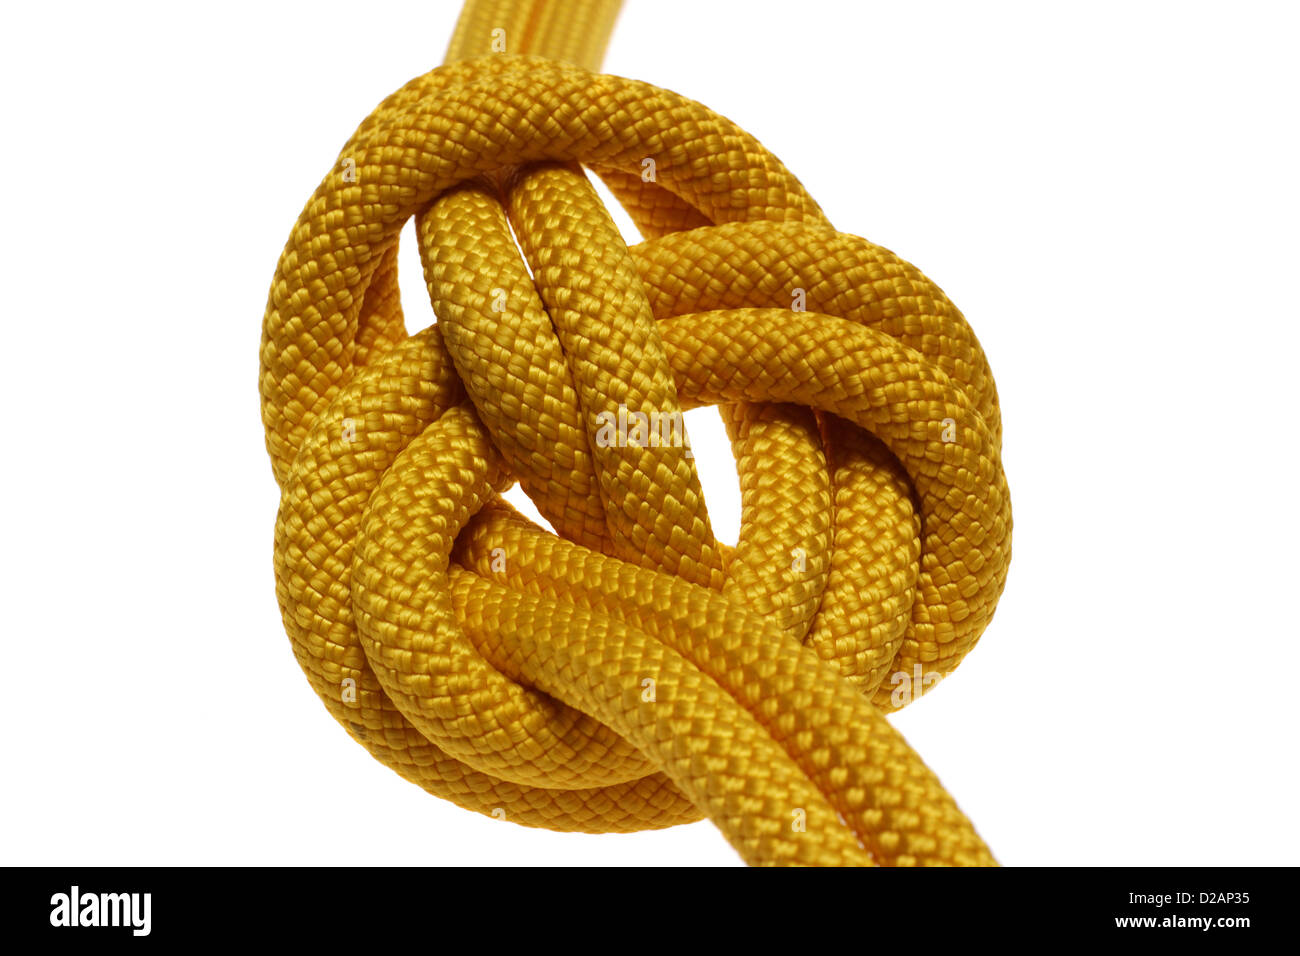 apocryphal knot on double yellow rope. isolated on white background Stock Photo